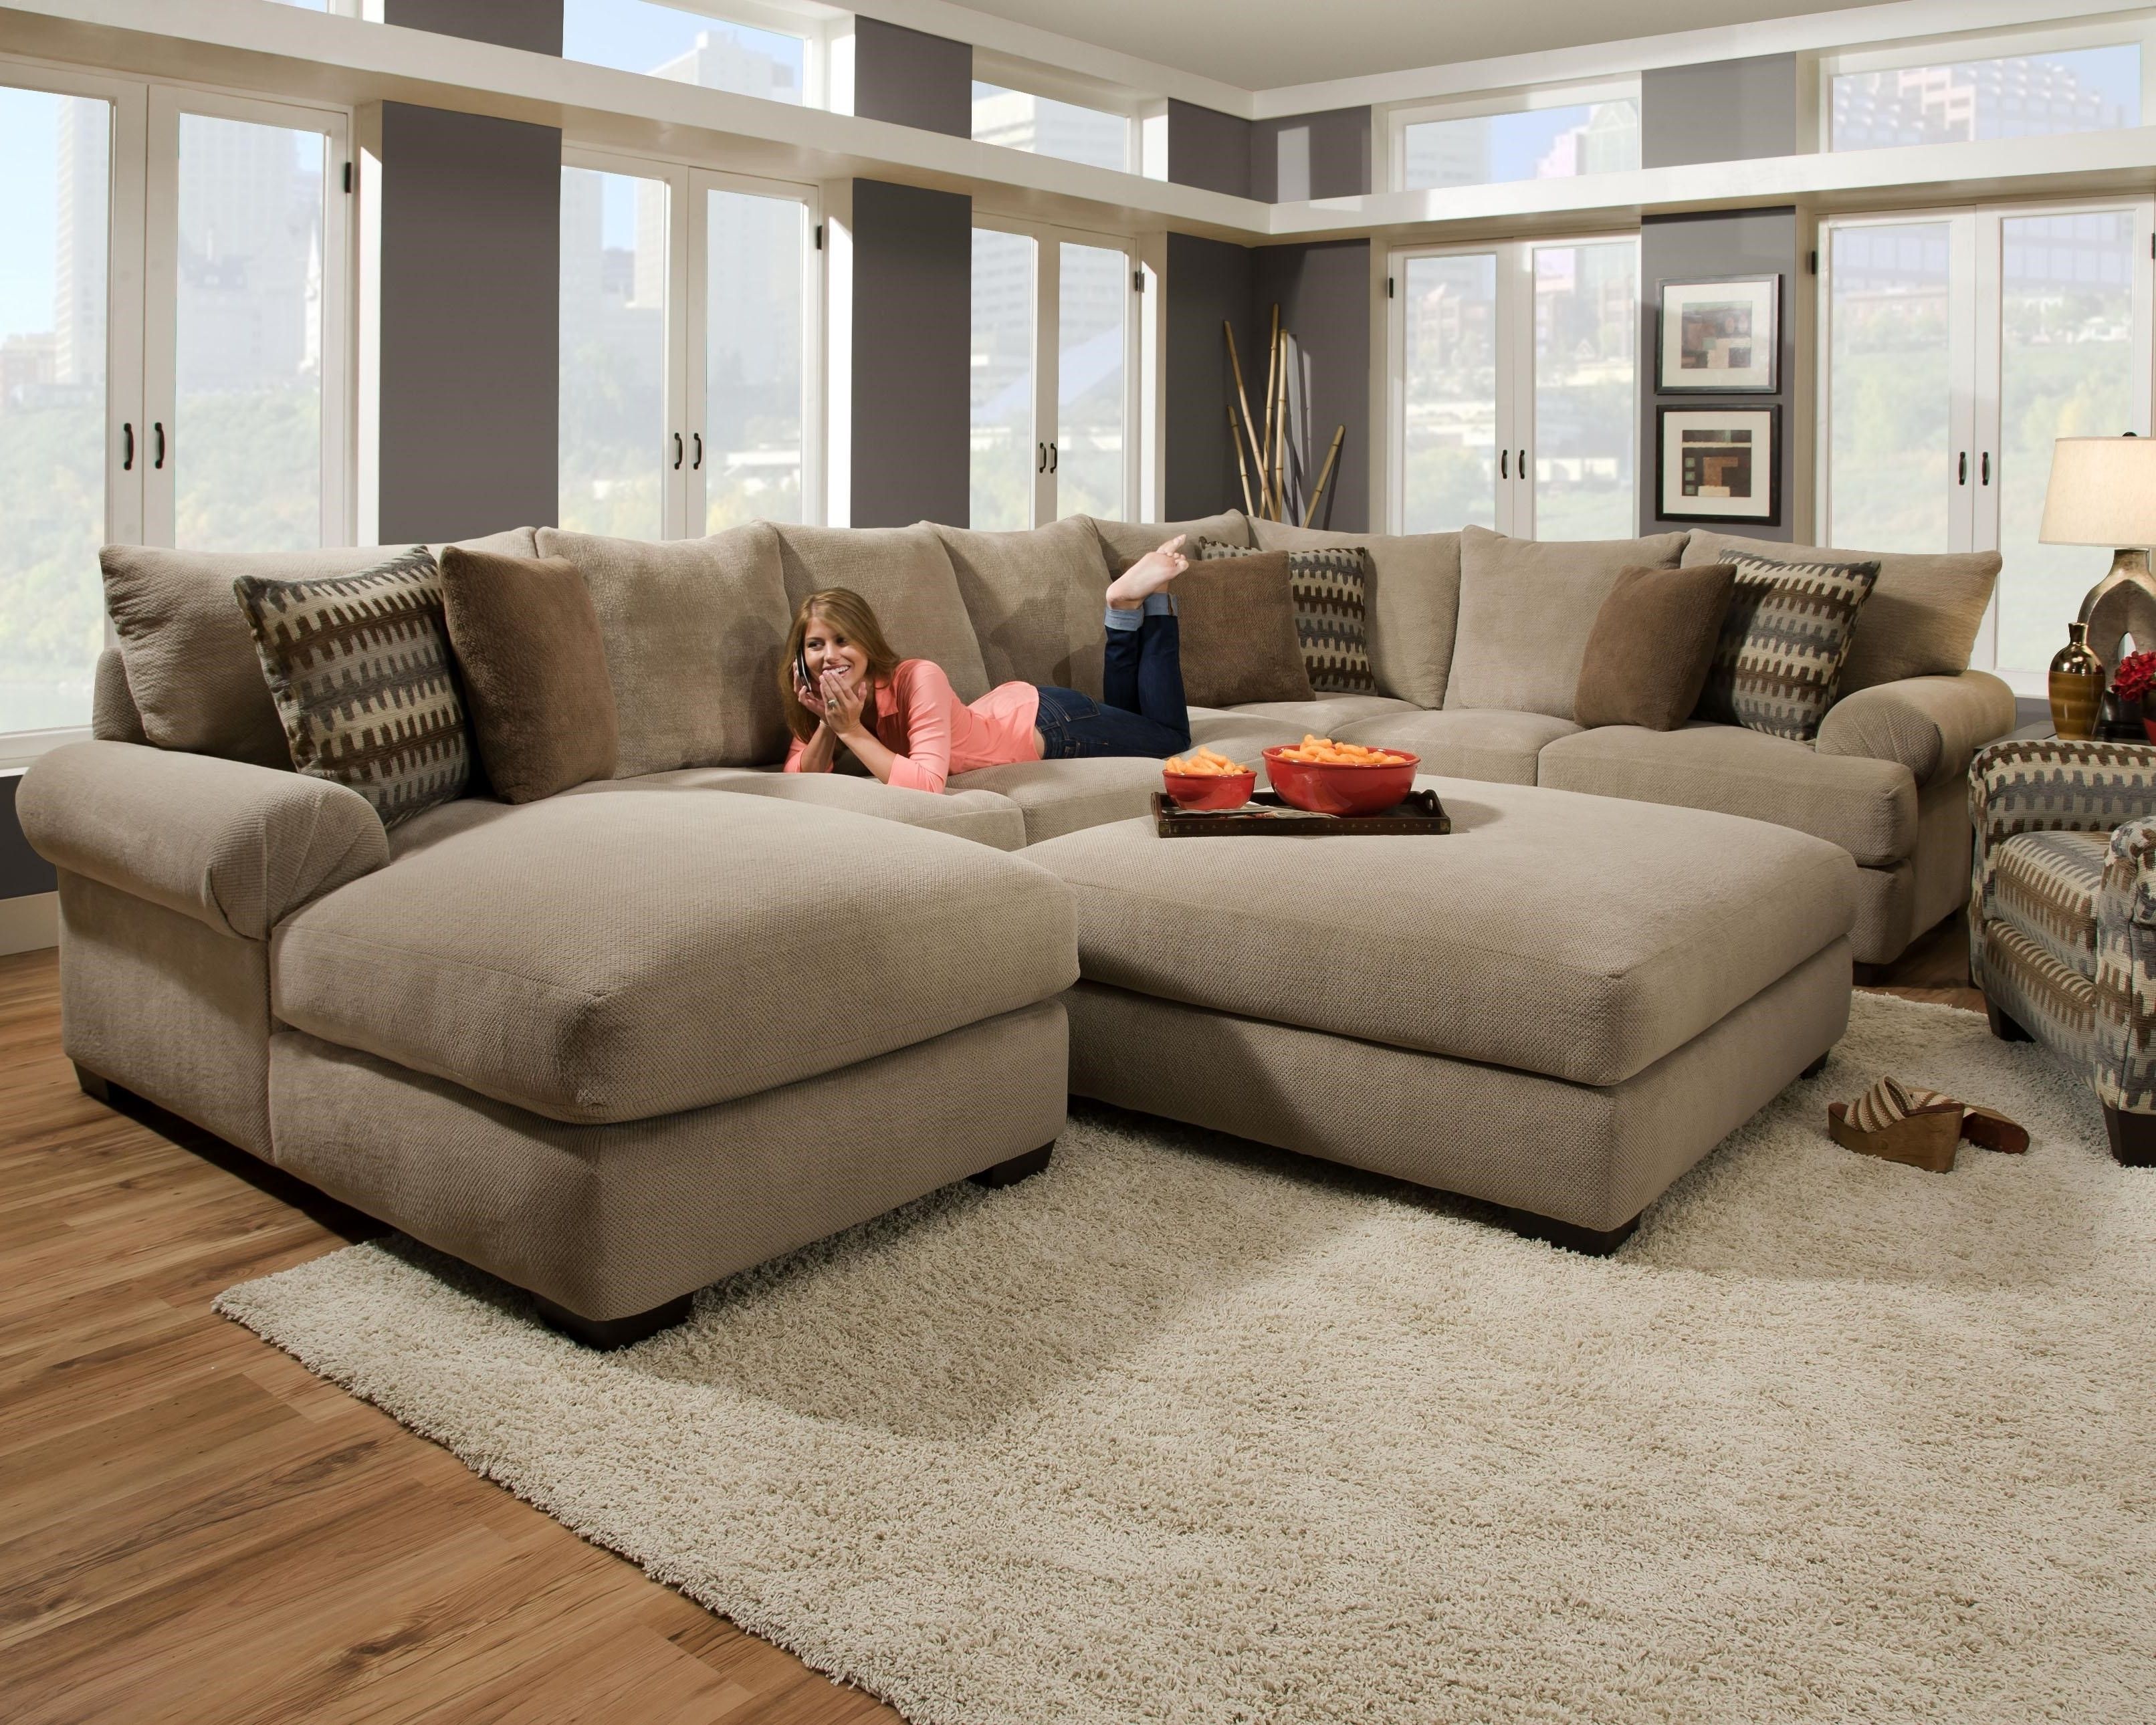 Trendy Vancouver Sectional Sofas For Incredible Modern Sectional Sofas Vancouver – Buildsimplehome (View 4 of 20)